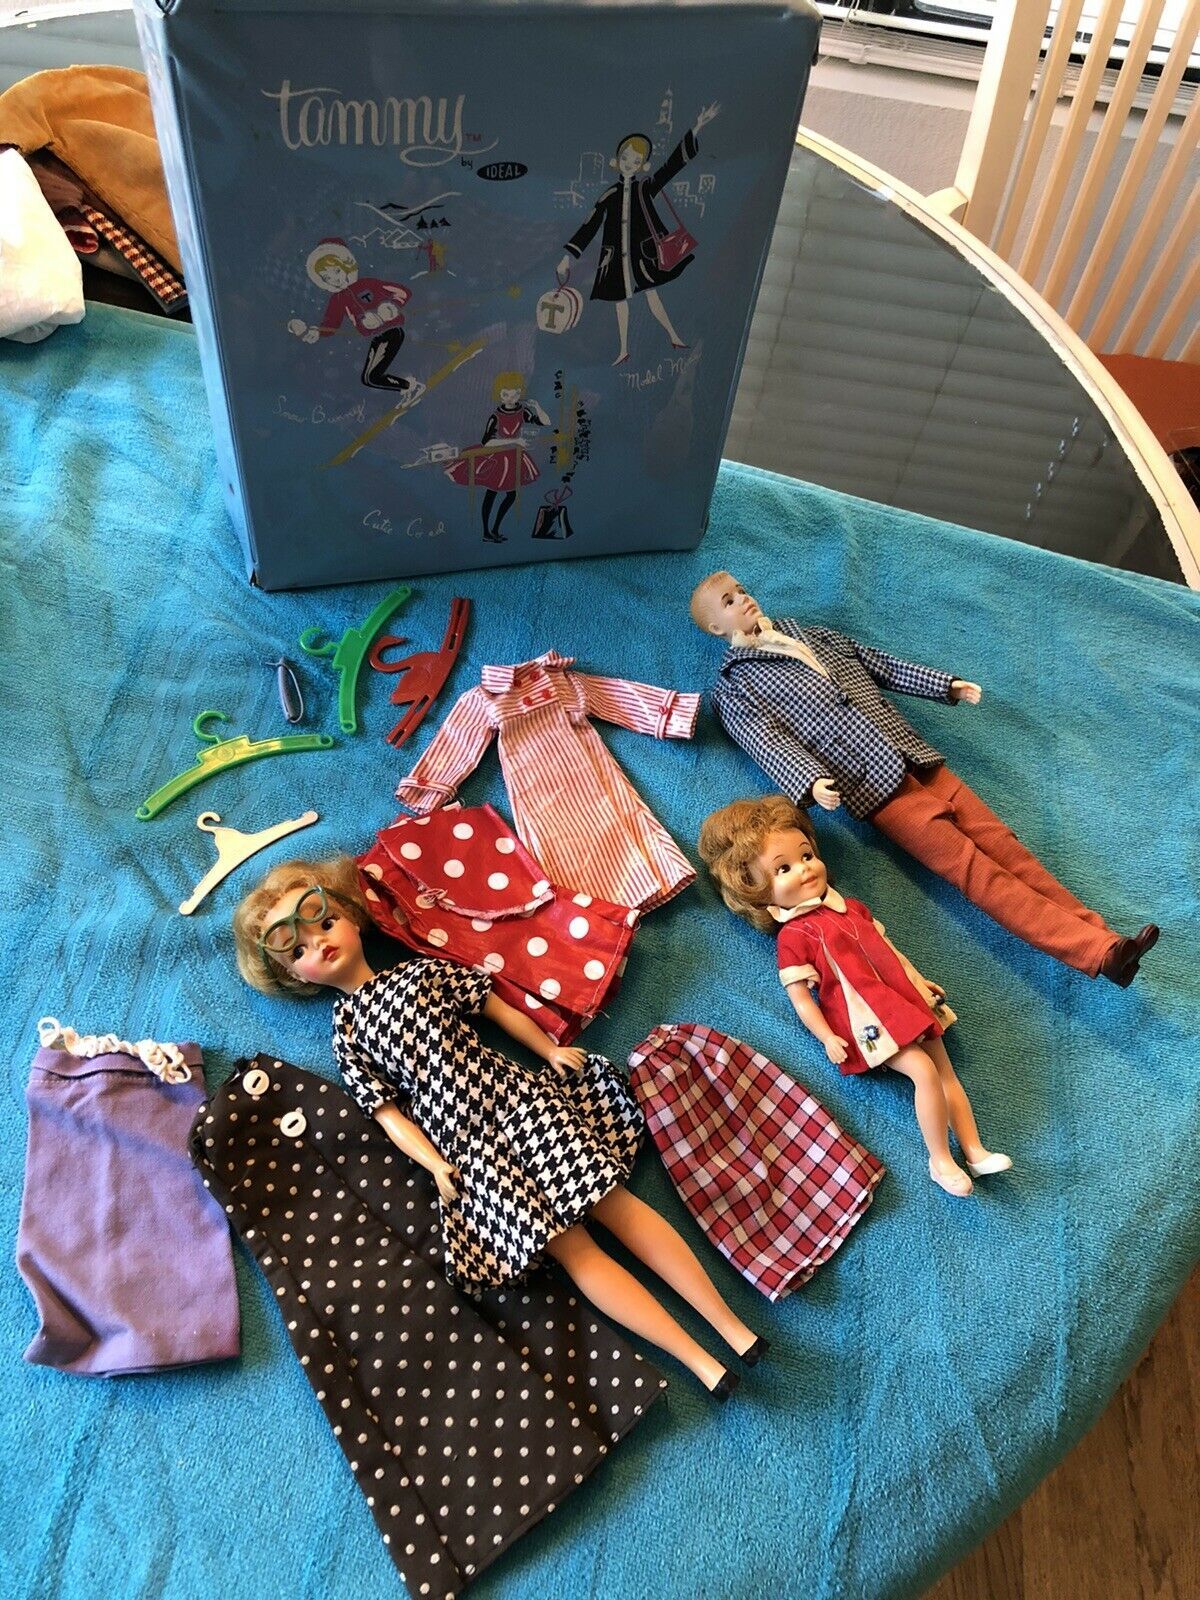 VINTAGE IDEAL 1960’s Original TAMMY & Family Dolls Clothes, Extras & Case HtF - $249.99